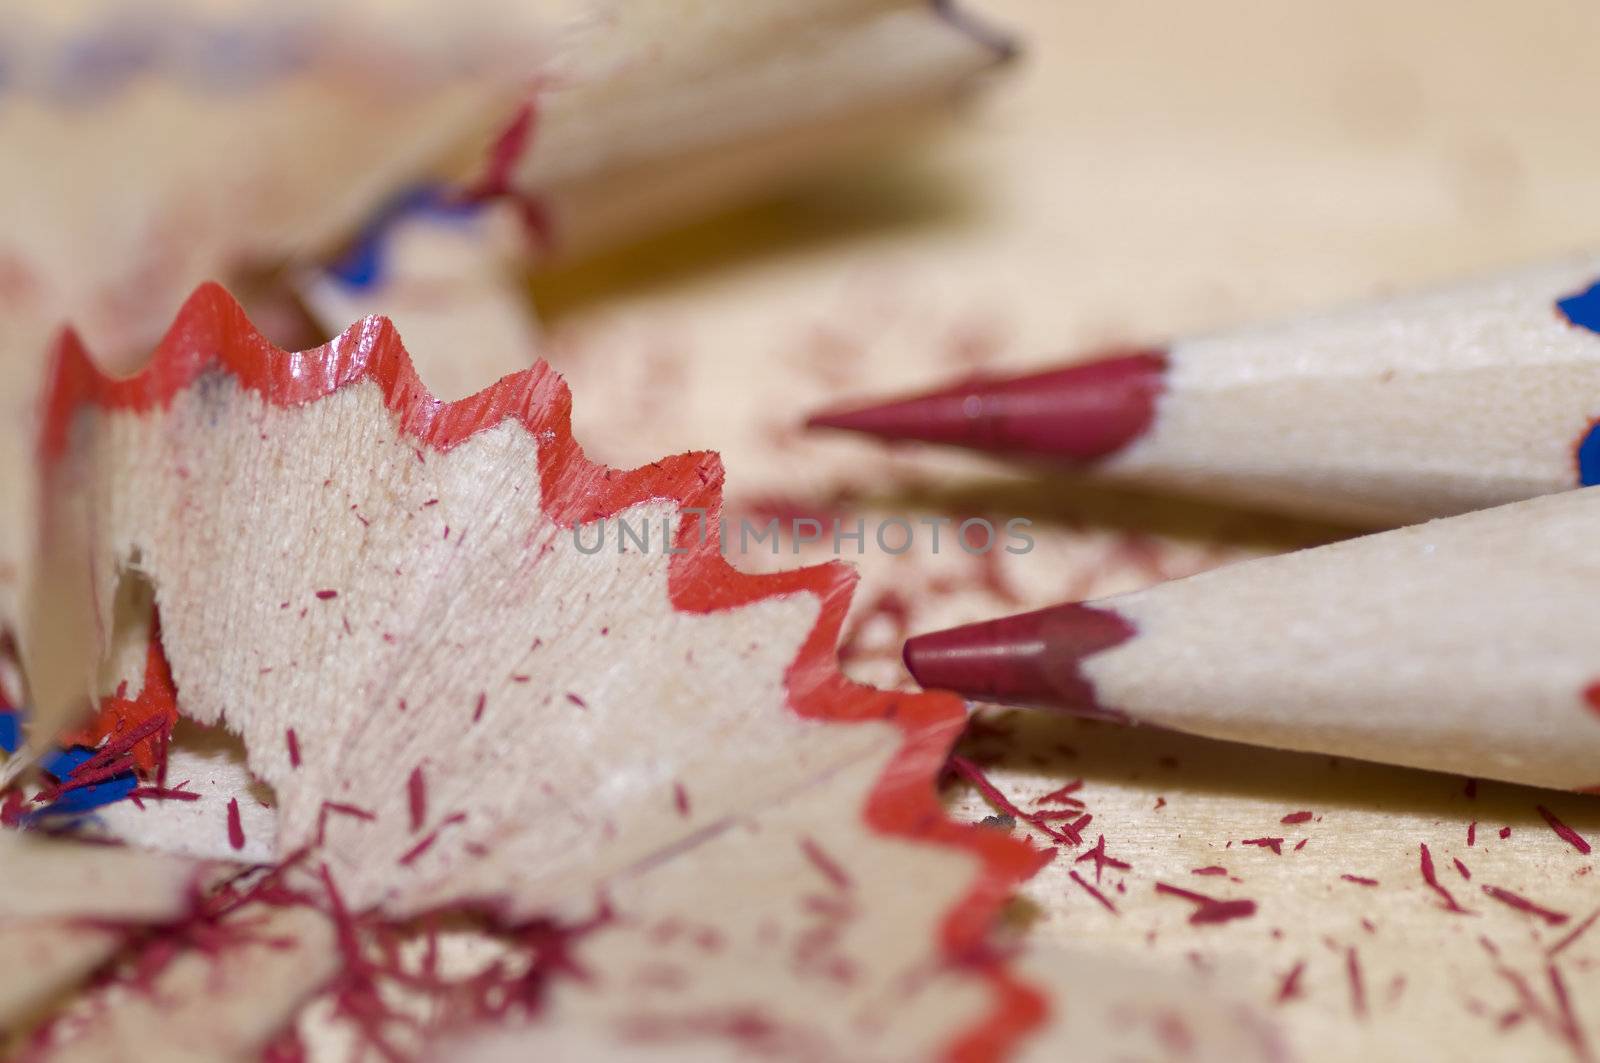 Sharpened pencils and wood shavings, on light color wood background